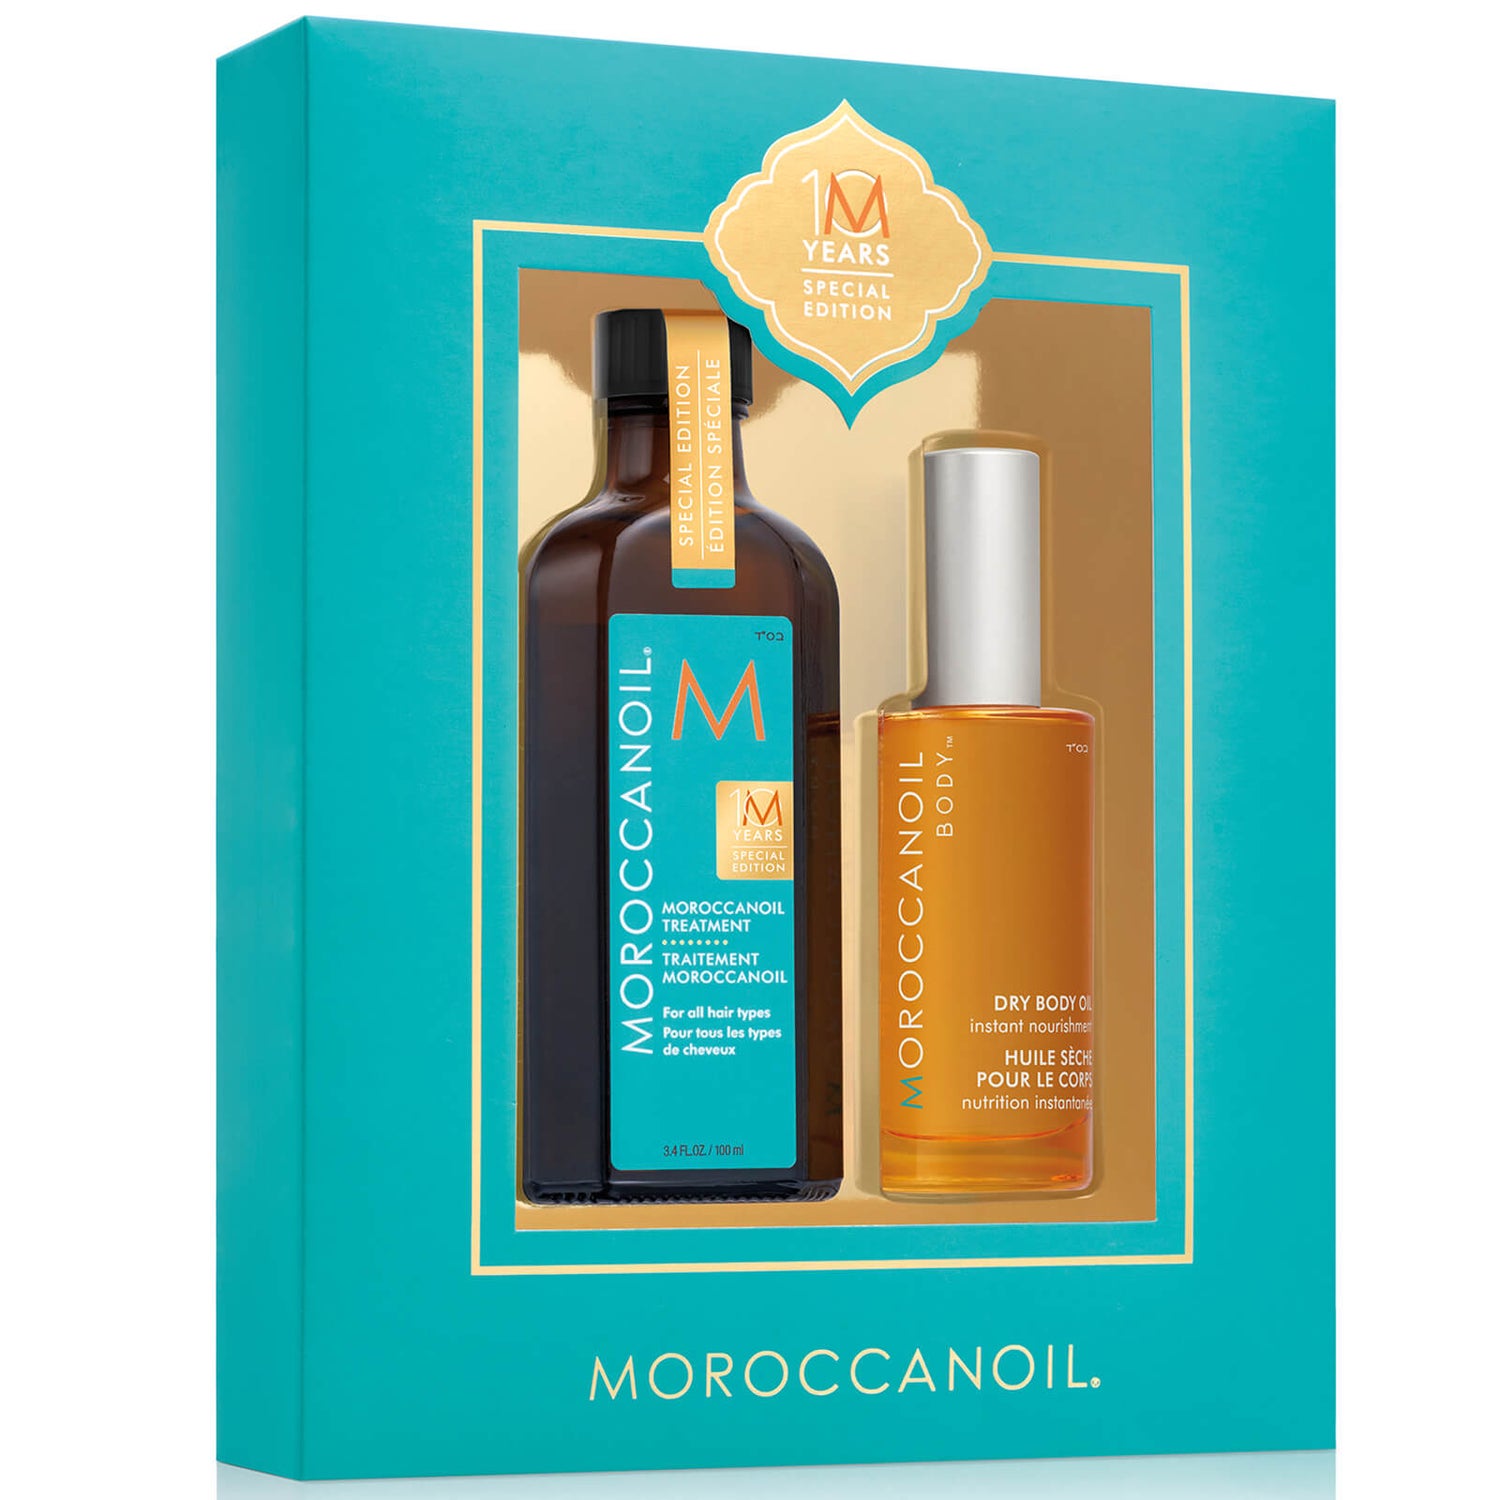 10 Special Edition - Treatment 100ml + Dry Body Oil 50ml £68.85) - LOOKFANTASTIC